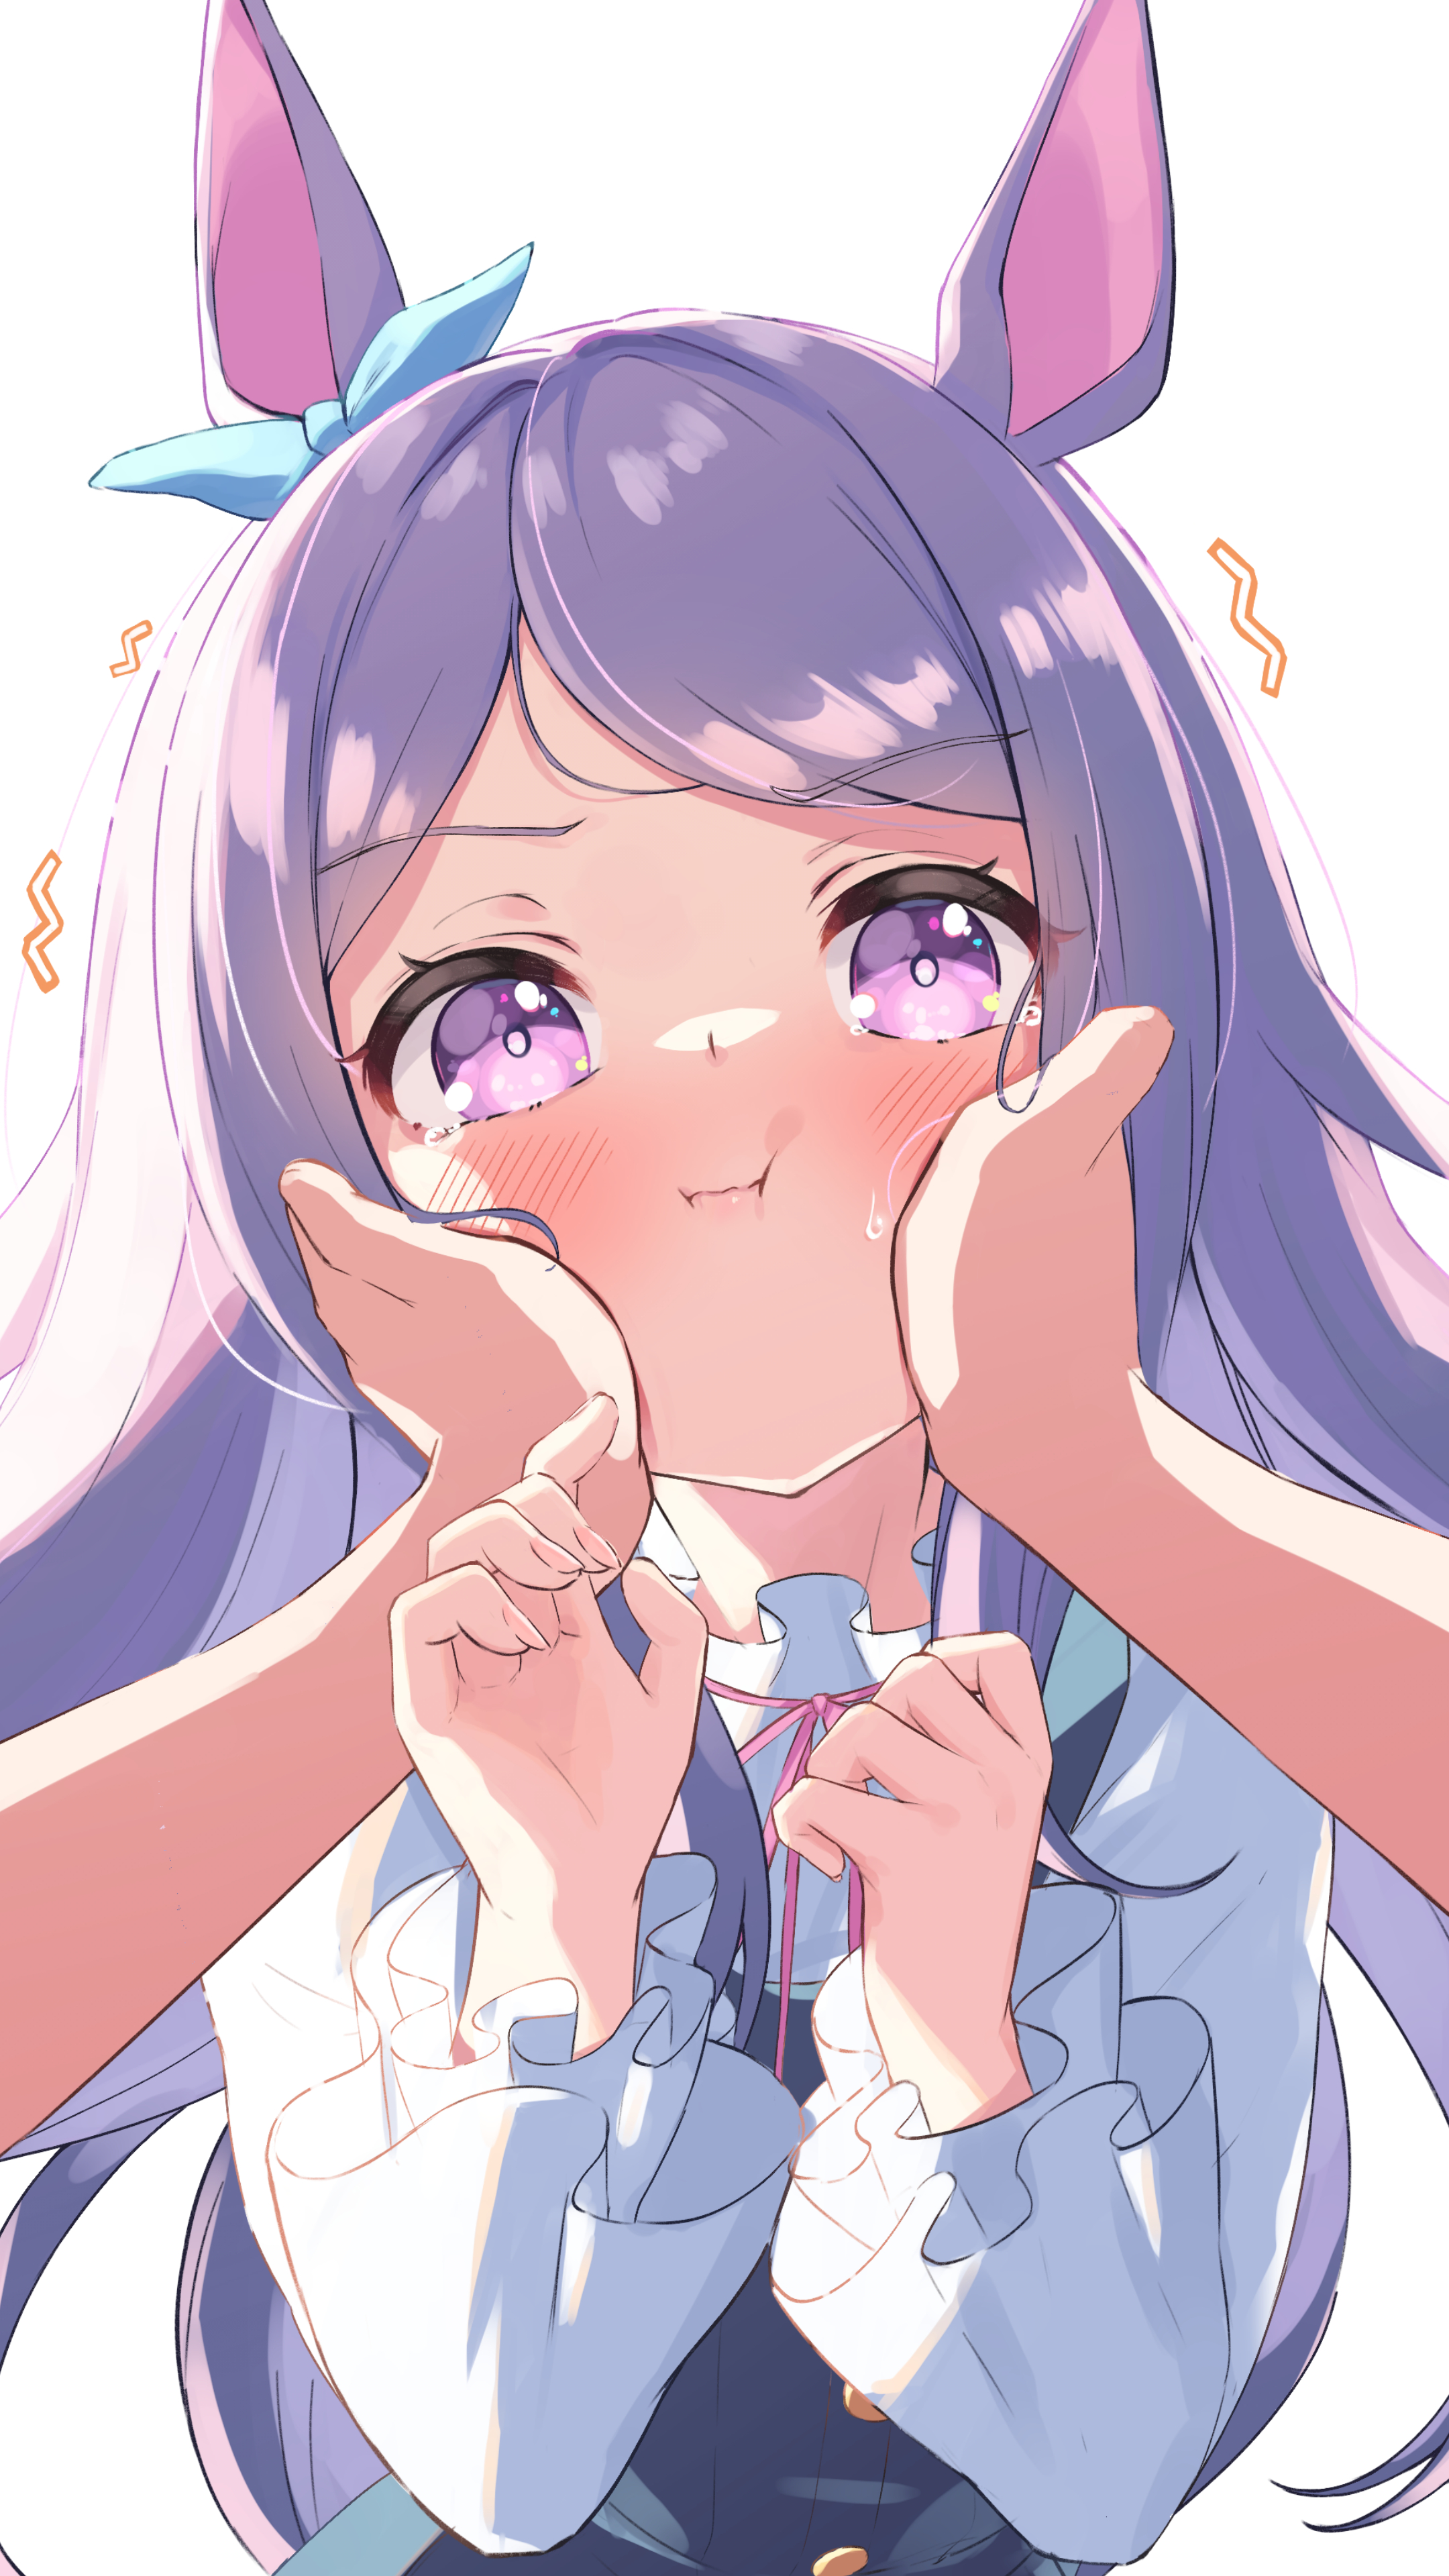 Uma Musume Pretty Derby Animal Ears Purple Eyes Hand On Face Crying Pink Nails Head Tilted White T S 2160x3840